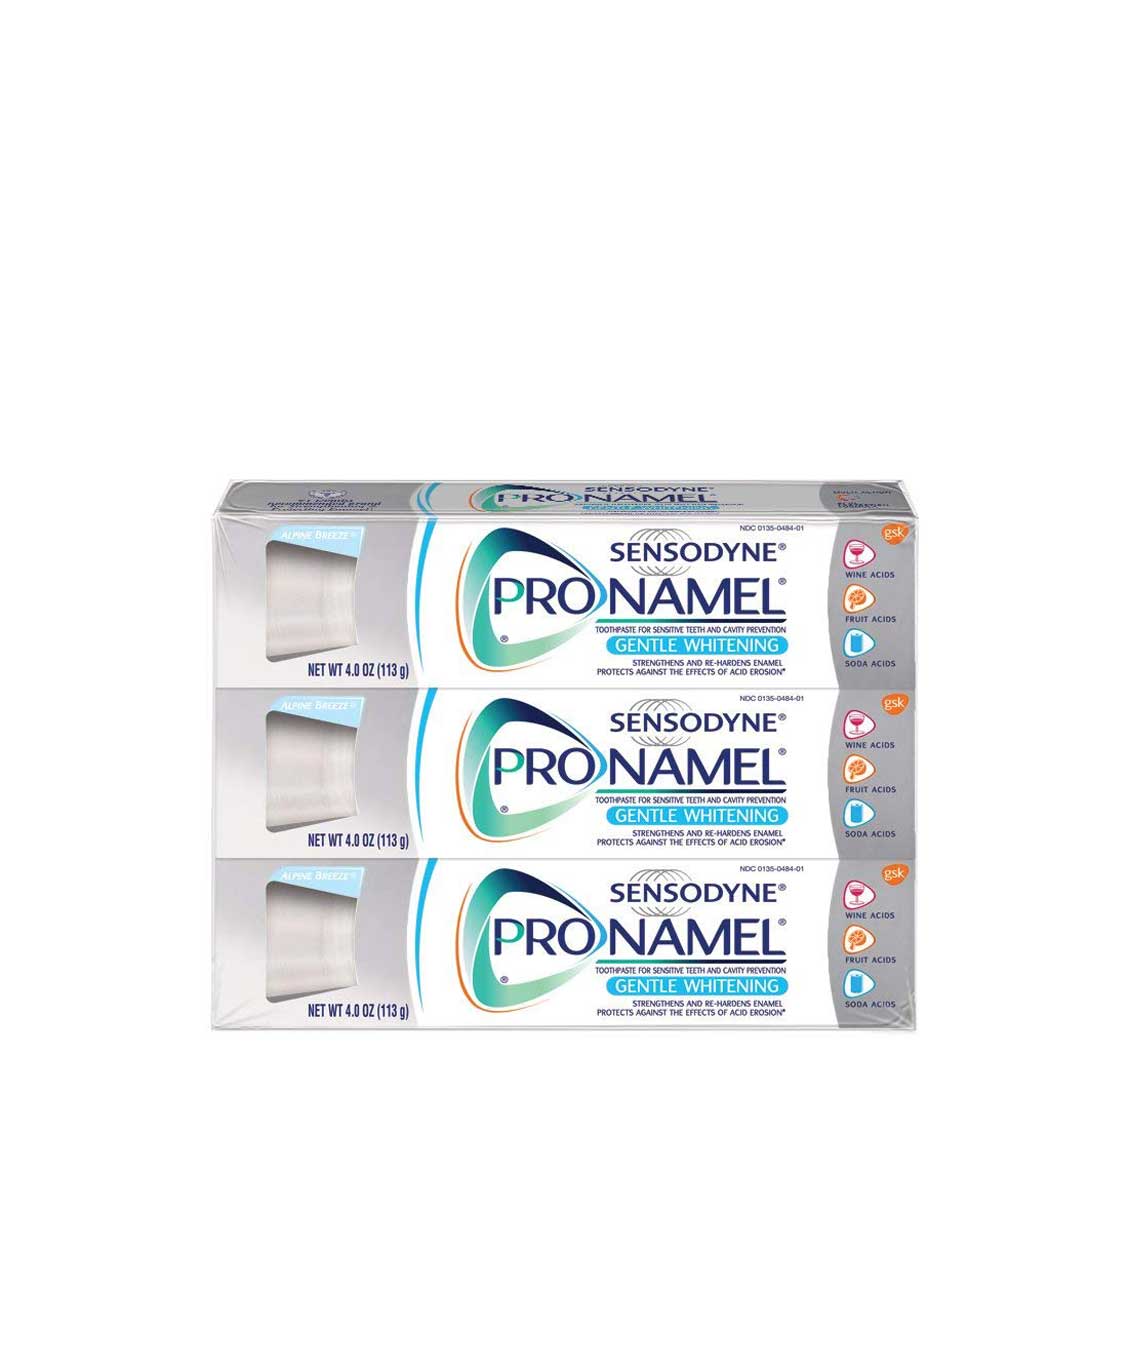 Sensodyne Pronamel Gentle Whitening Fluoride Toothpaste To Strengthen and Protect Enamel, 4 Ounce (Pack of 3)